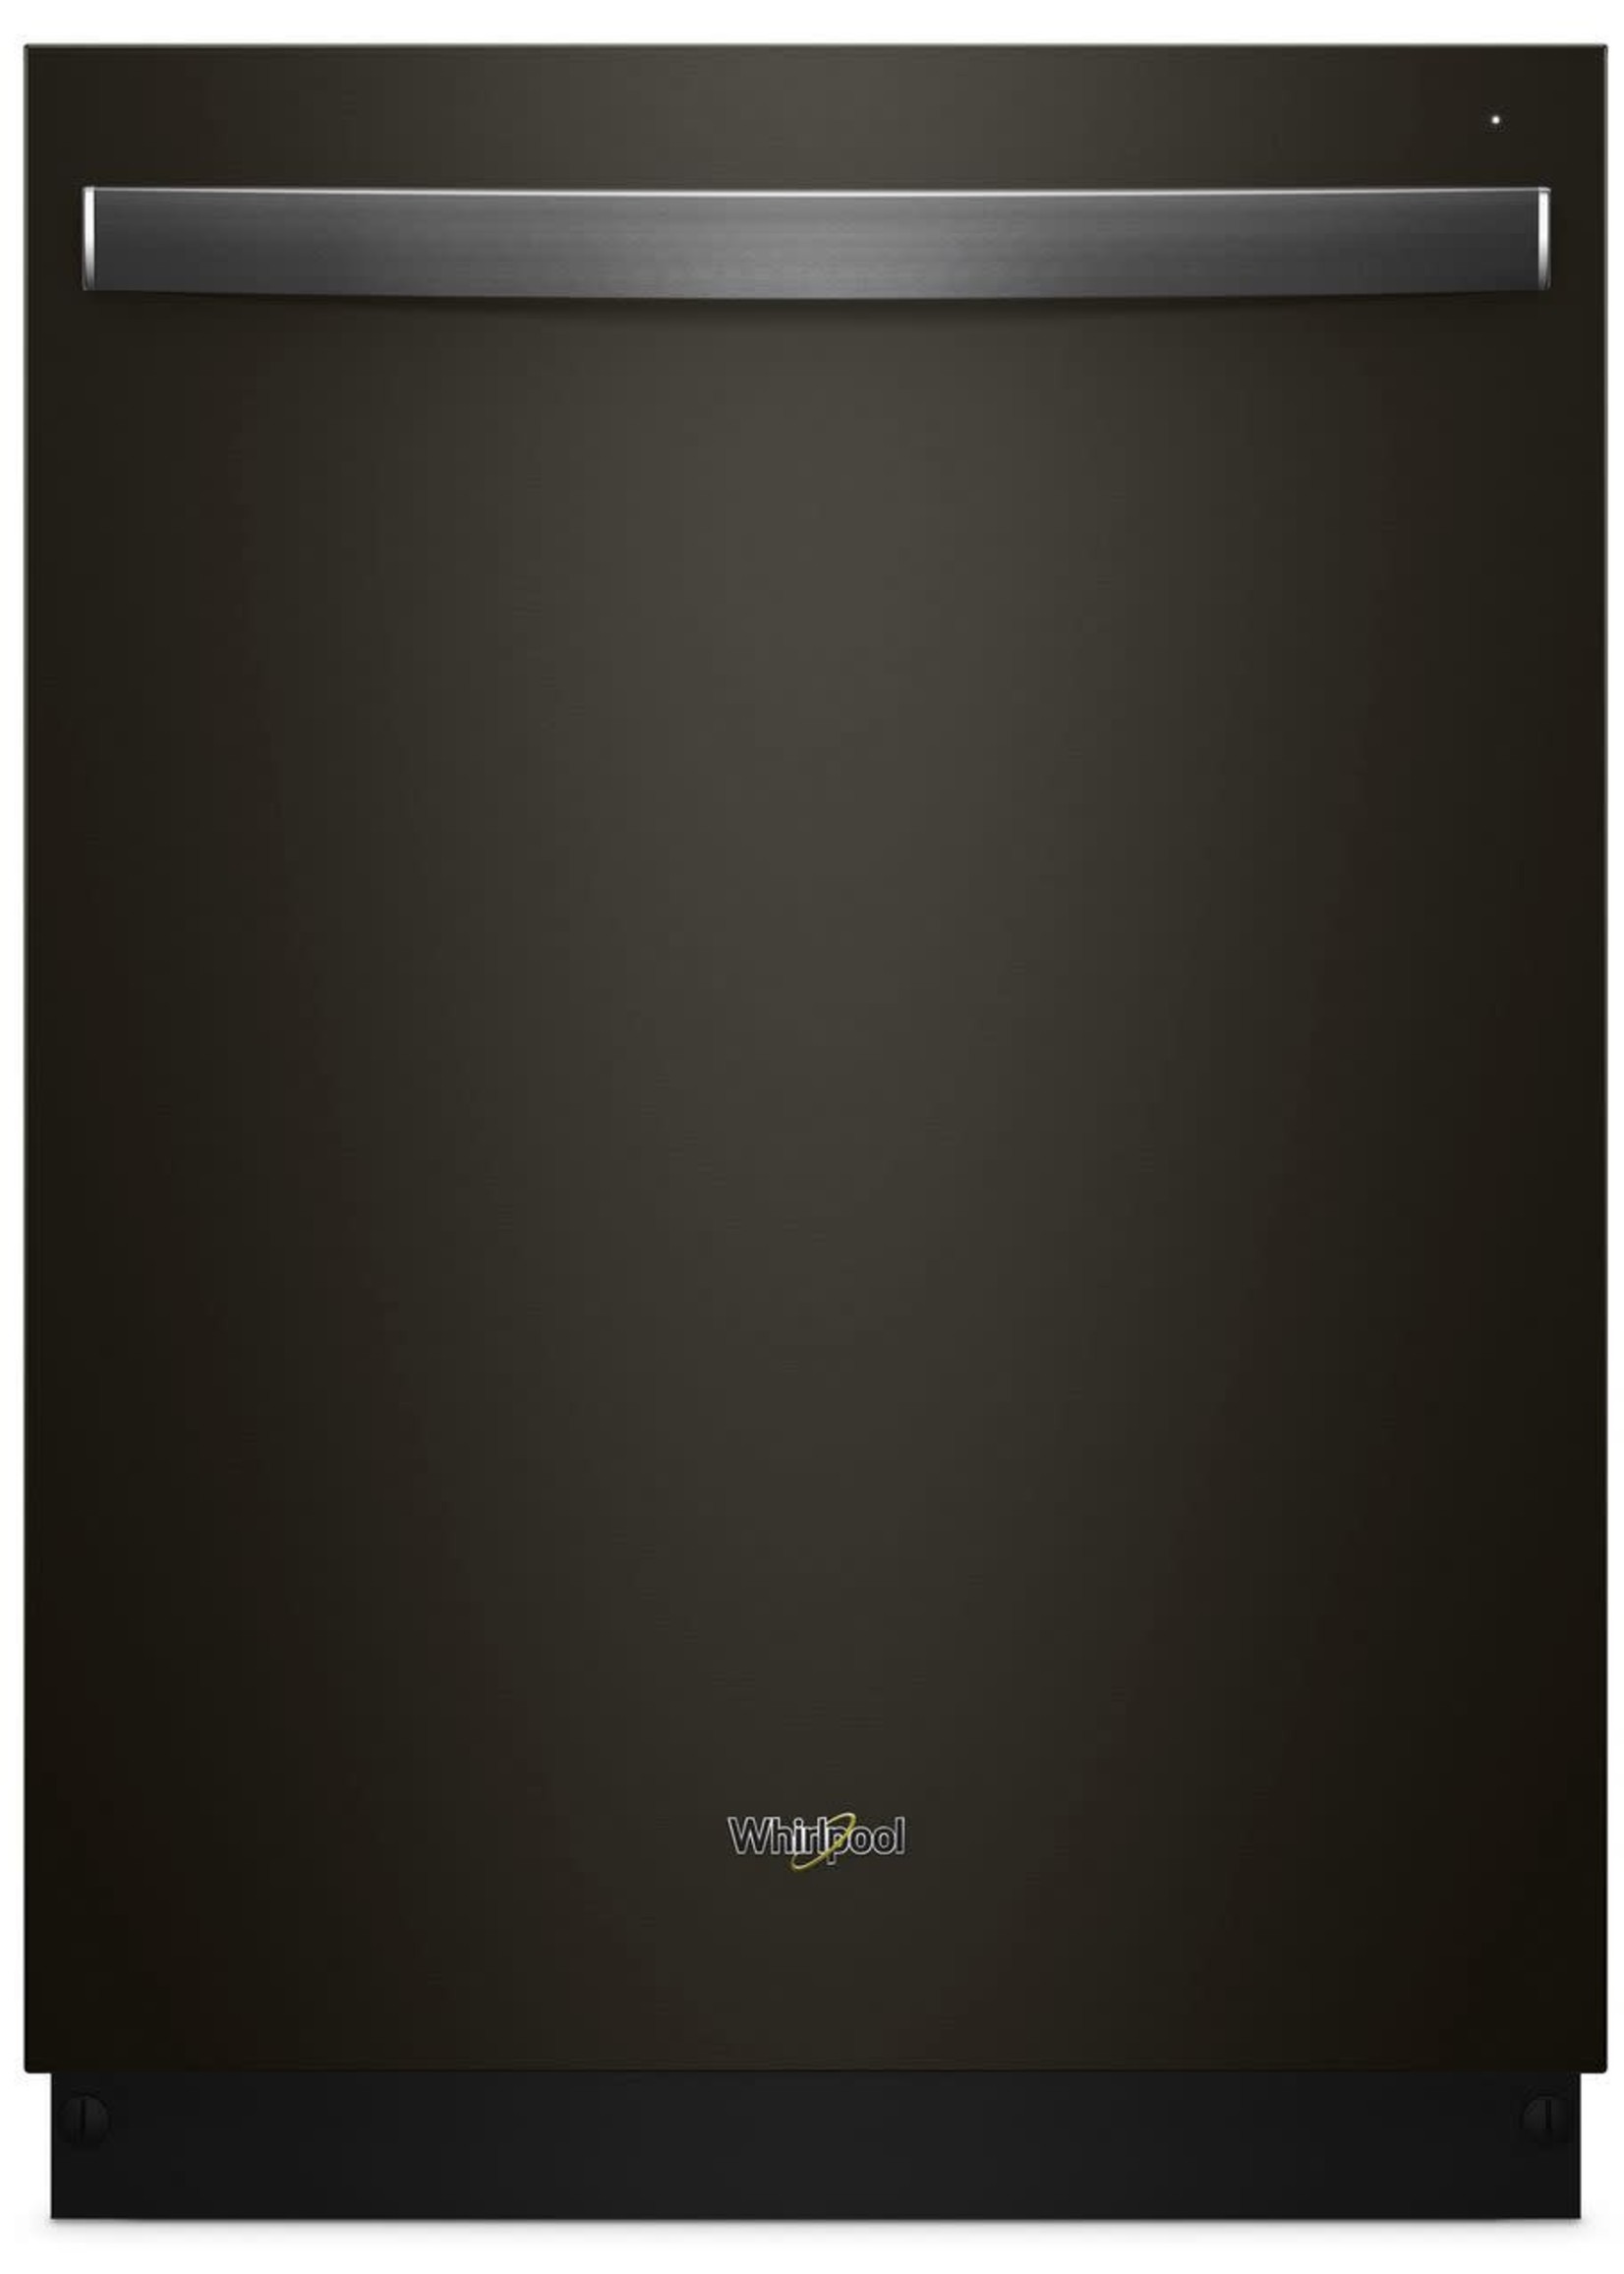 WHR Whirlpool - 24" Built-In Dishwasher - Black stainless steel